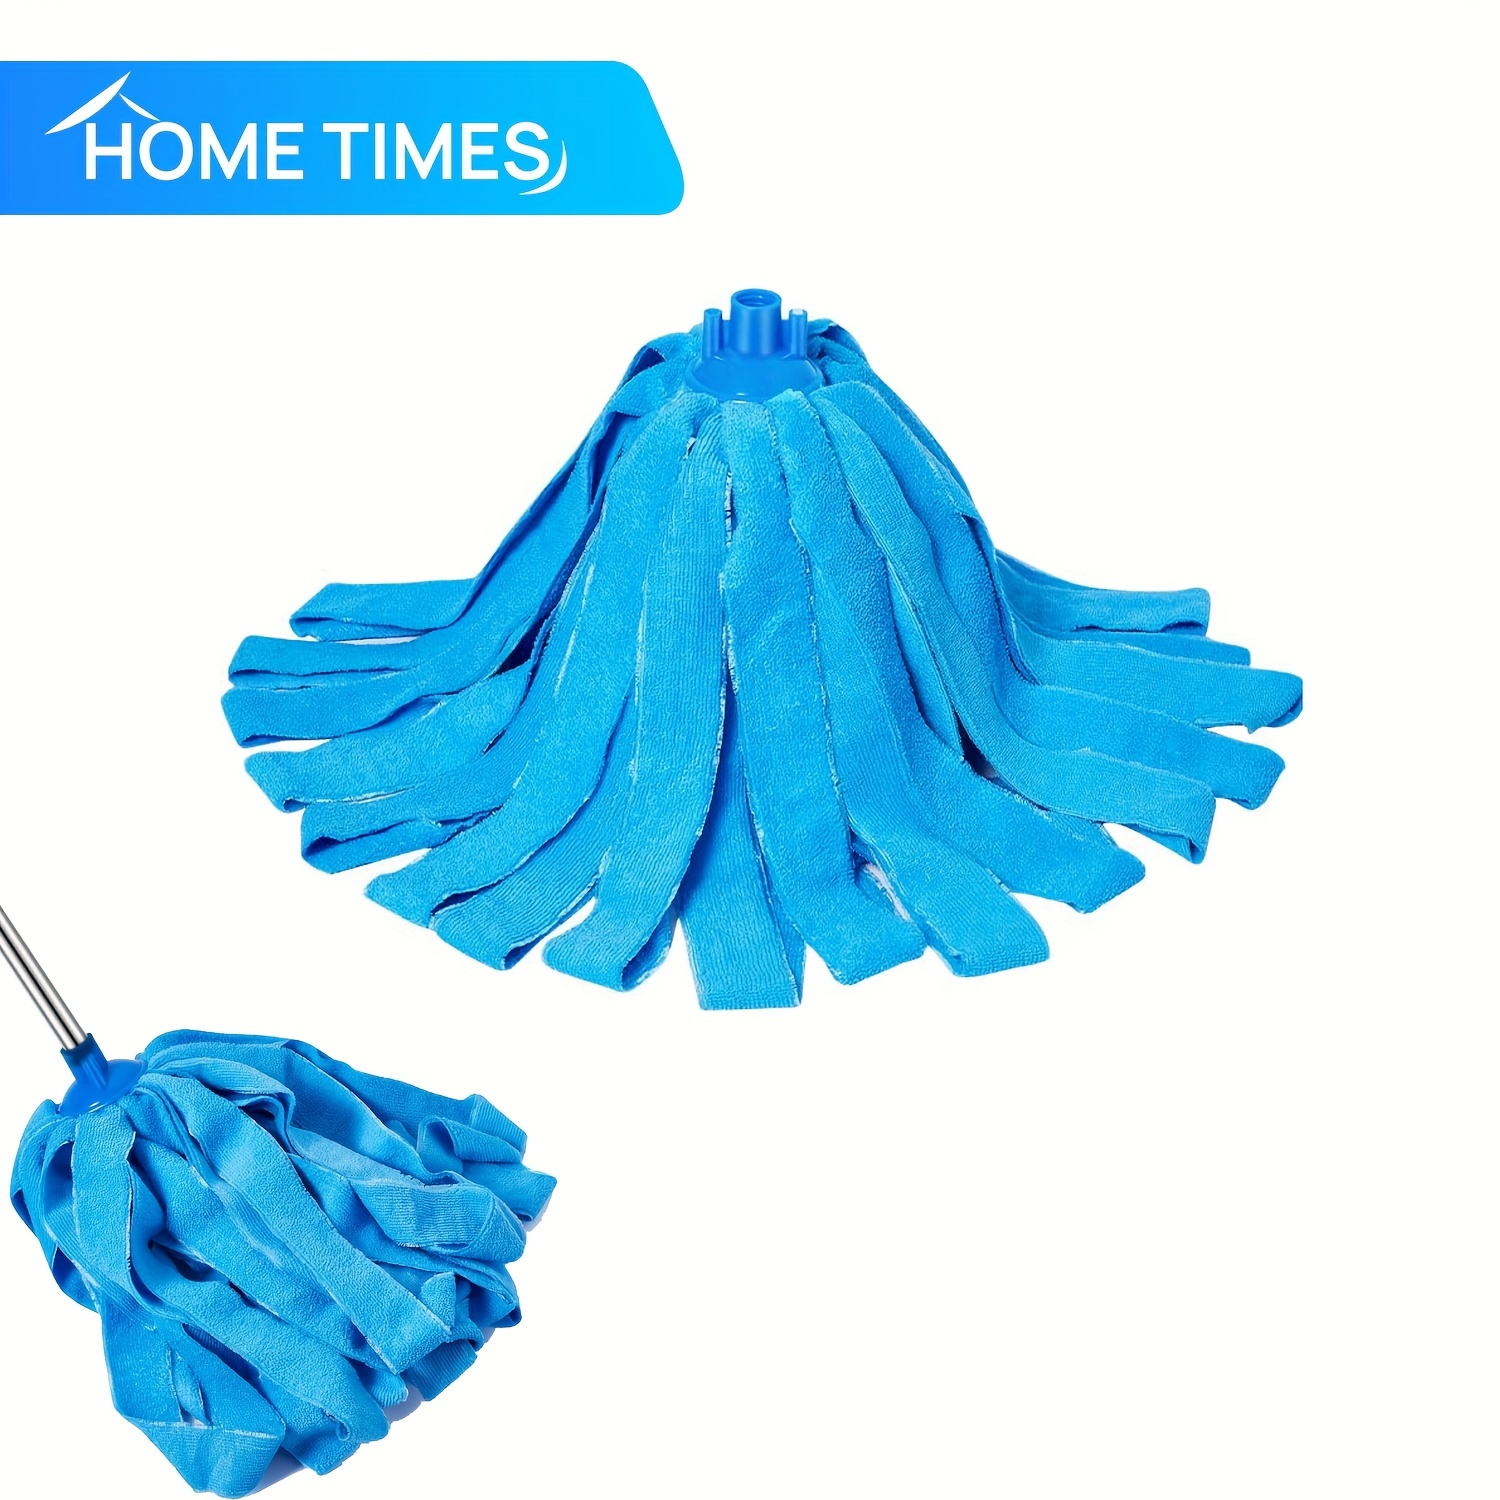 

Home Times 1-piece Blue Microfiber Mop Head Refill - Fits 0.8" Handles, Deep Cleaning, Machine Washable, Compatible With & More - Essential Home Cleaning Accessory